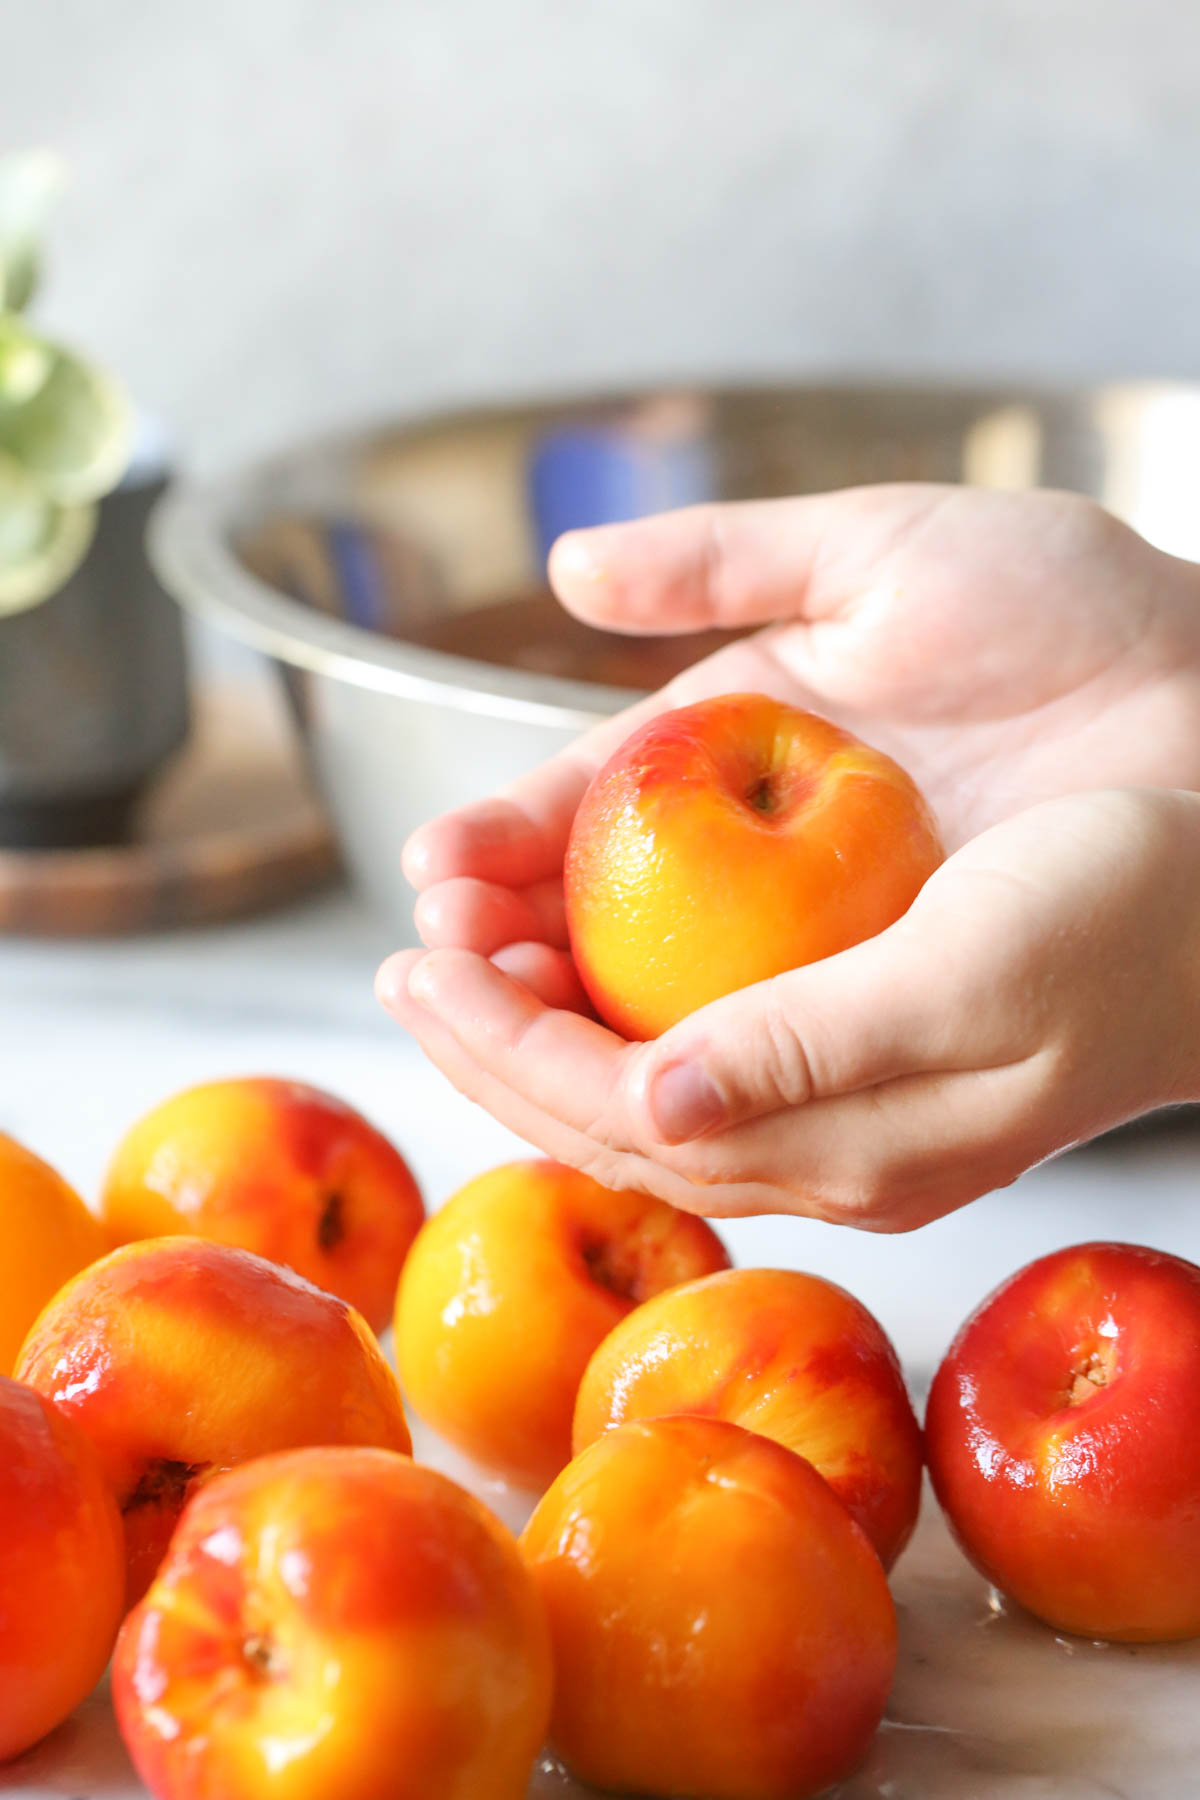 A hand holding a peach that has been peeled, with several more peeled peaches under the hand.  